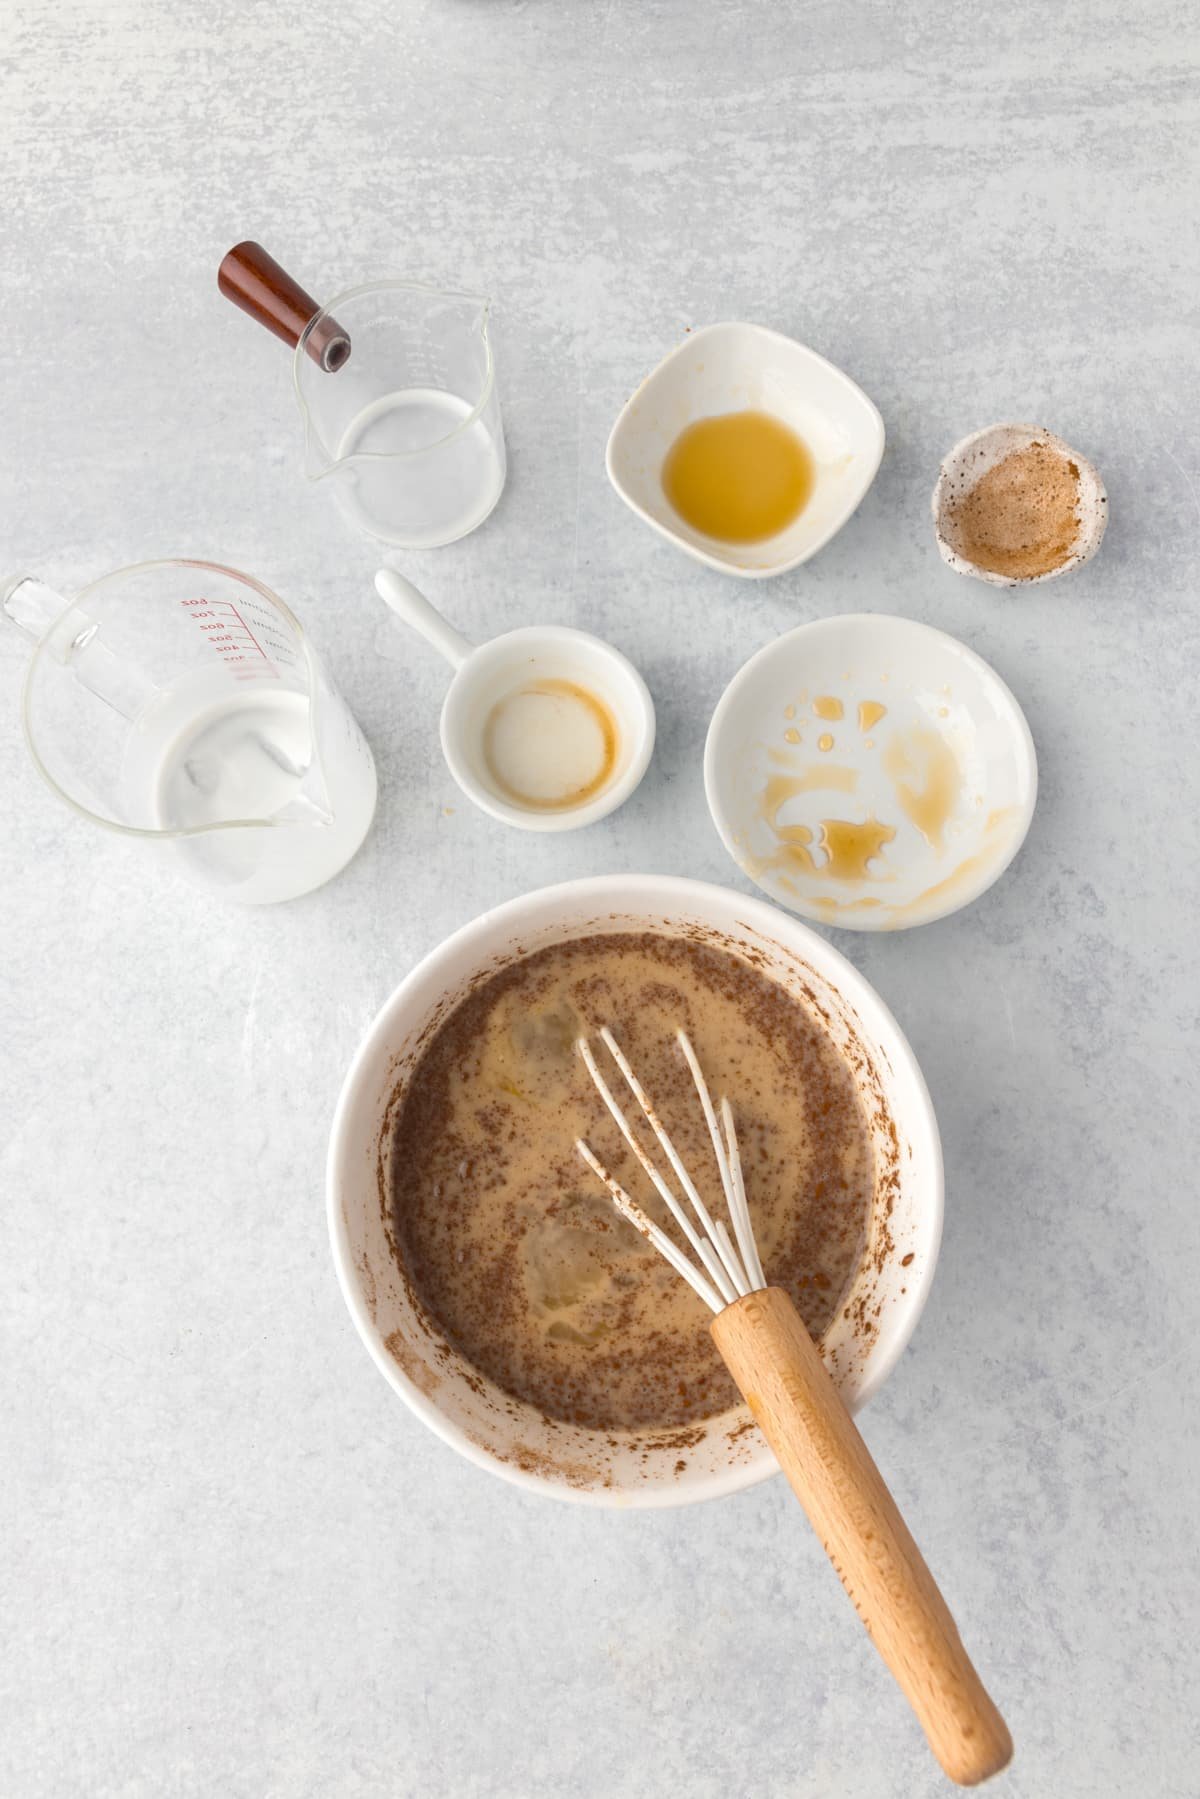 Whisking together ingredients in a bowl, with empty cups and bowls surrounding it.